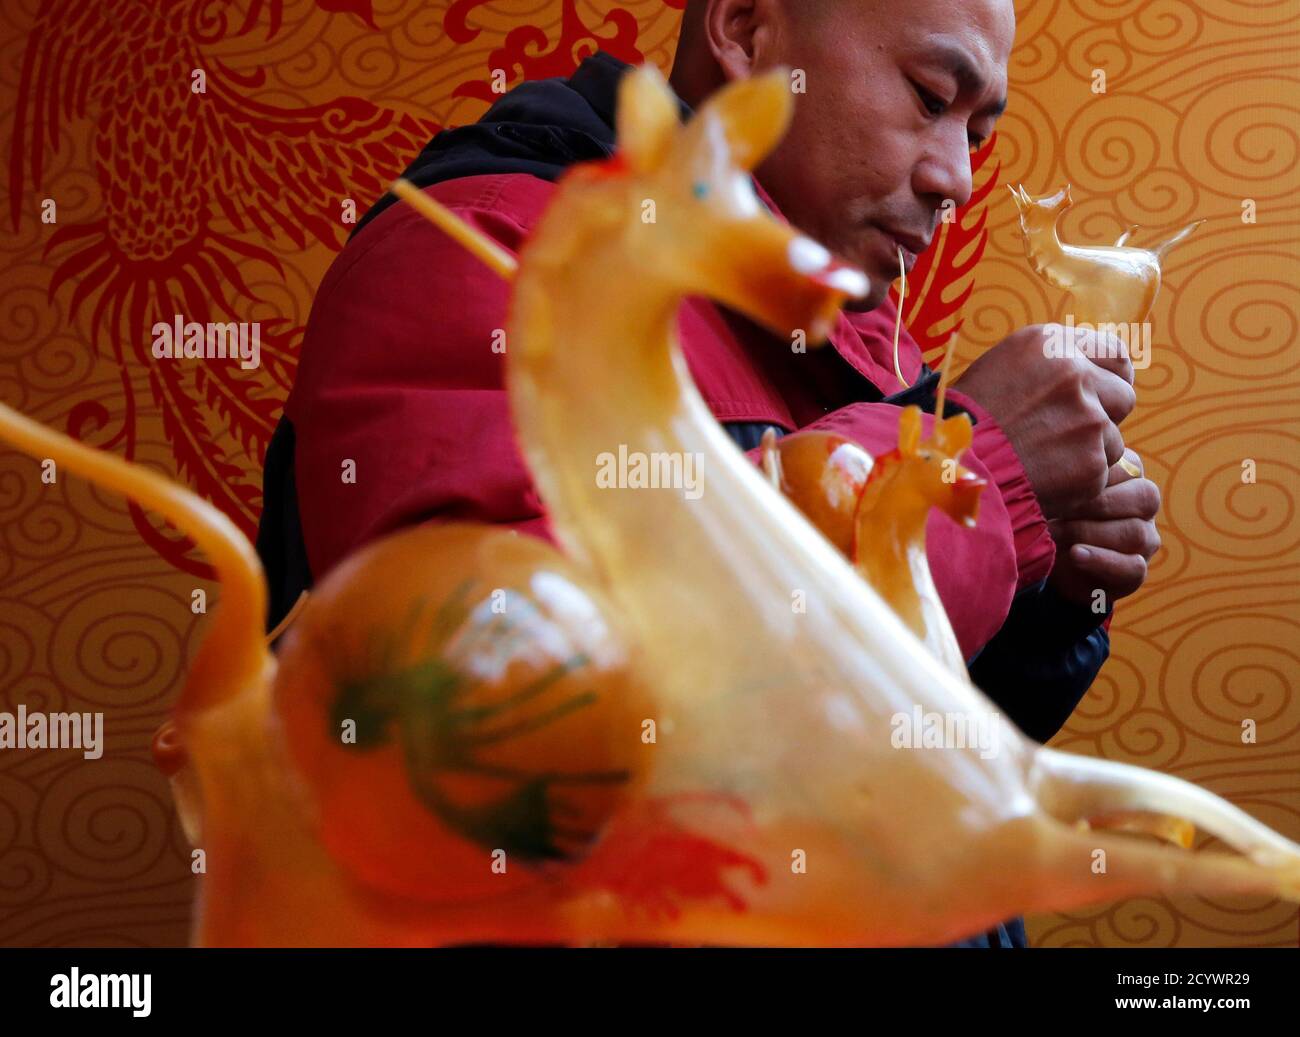 Folk artist Hou Gouyi blows boiled sugar to form the shape of a horse at a temple fair for the traditional Chinese Spring Festival on the third day of the Lunar New Year at Ditan Park, also known as the Temple of Earth, in Beijing February 2, 2014. Sugar sculpture blowing is a traditional Chinese folk art where artists blow and sculpt hot sugar to create three-dimensional figures. The Lunar New Year, or Spring Festival, began on January 31 and marked the start of the Year of the Horse, according to the Chinese zodiac.   REUTERS/Kim Kyung-Hoon (CHINA - Tags: ANNIVERSARY SOCIETY) Stock Photo